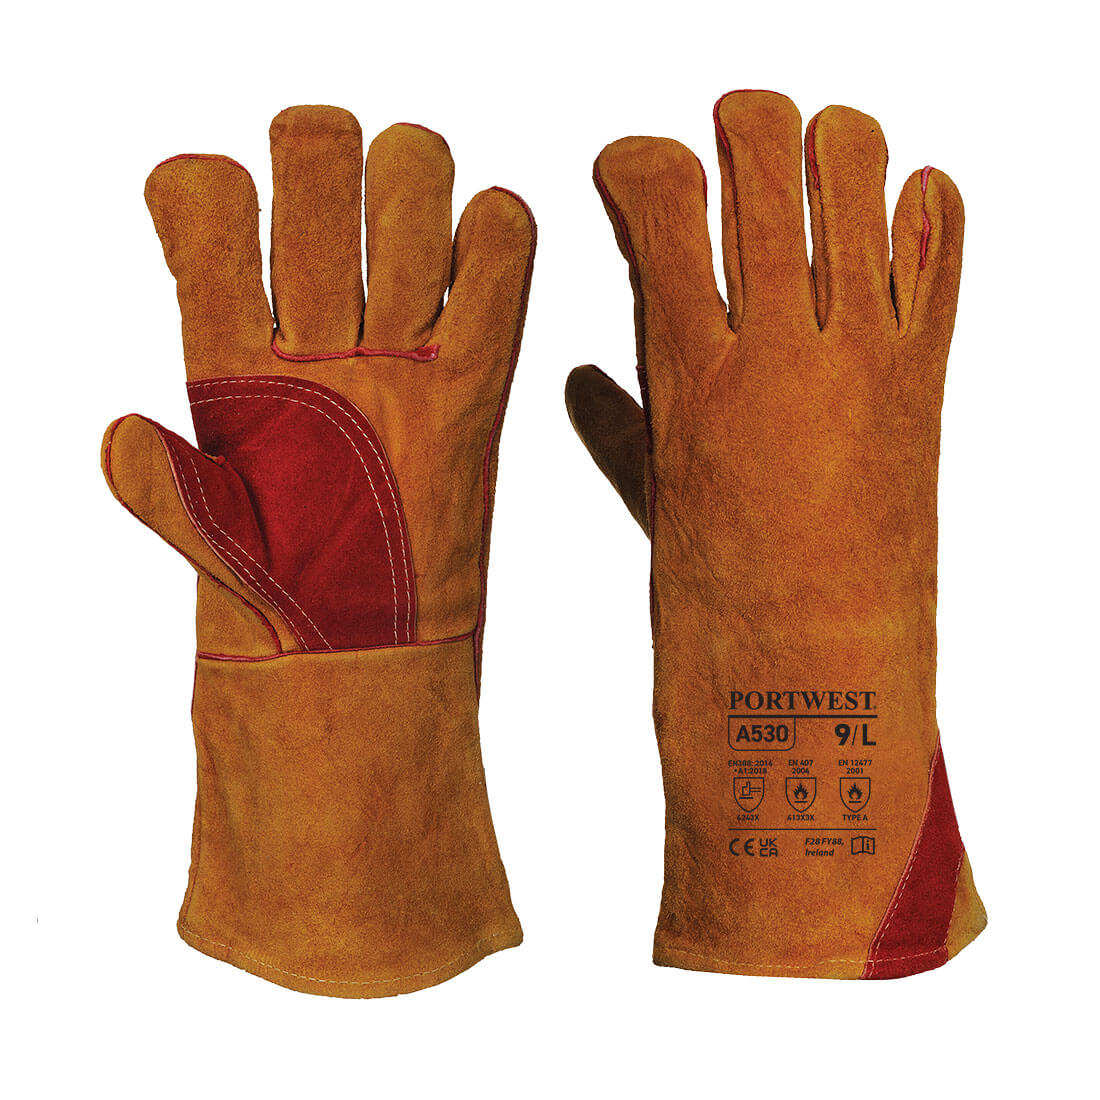 PARA-ARAMID LEATHER GLOVE WELDING REINFORCED GAUNTLET CE HAND PROTECTION - Hamtons Direct